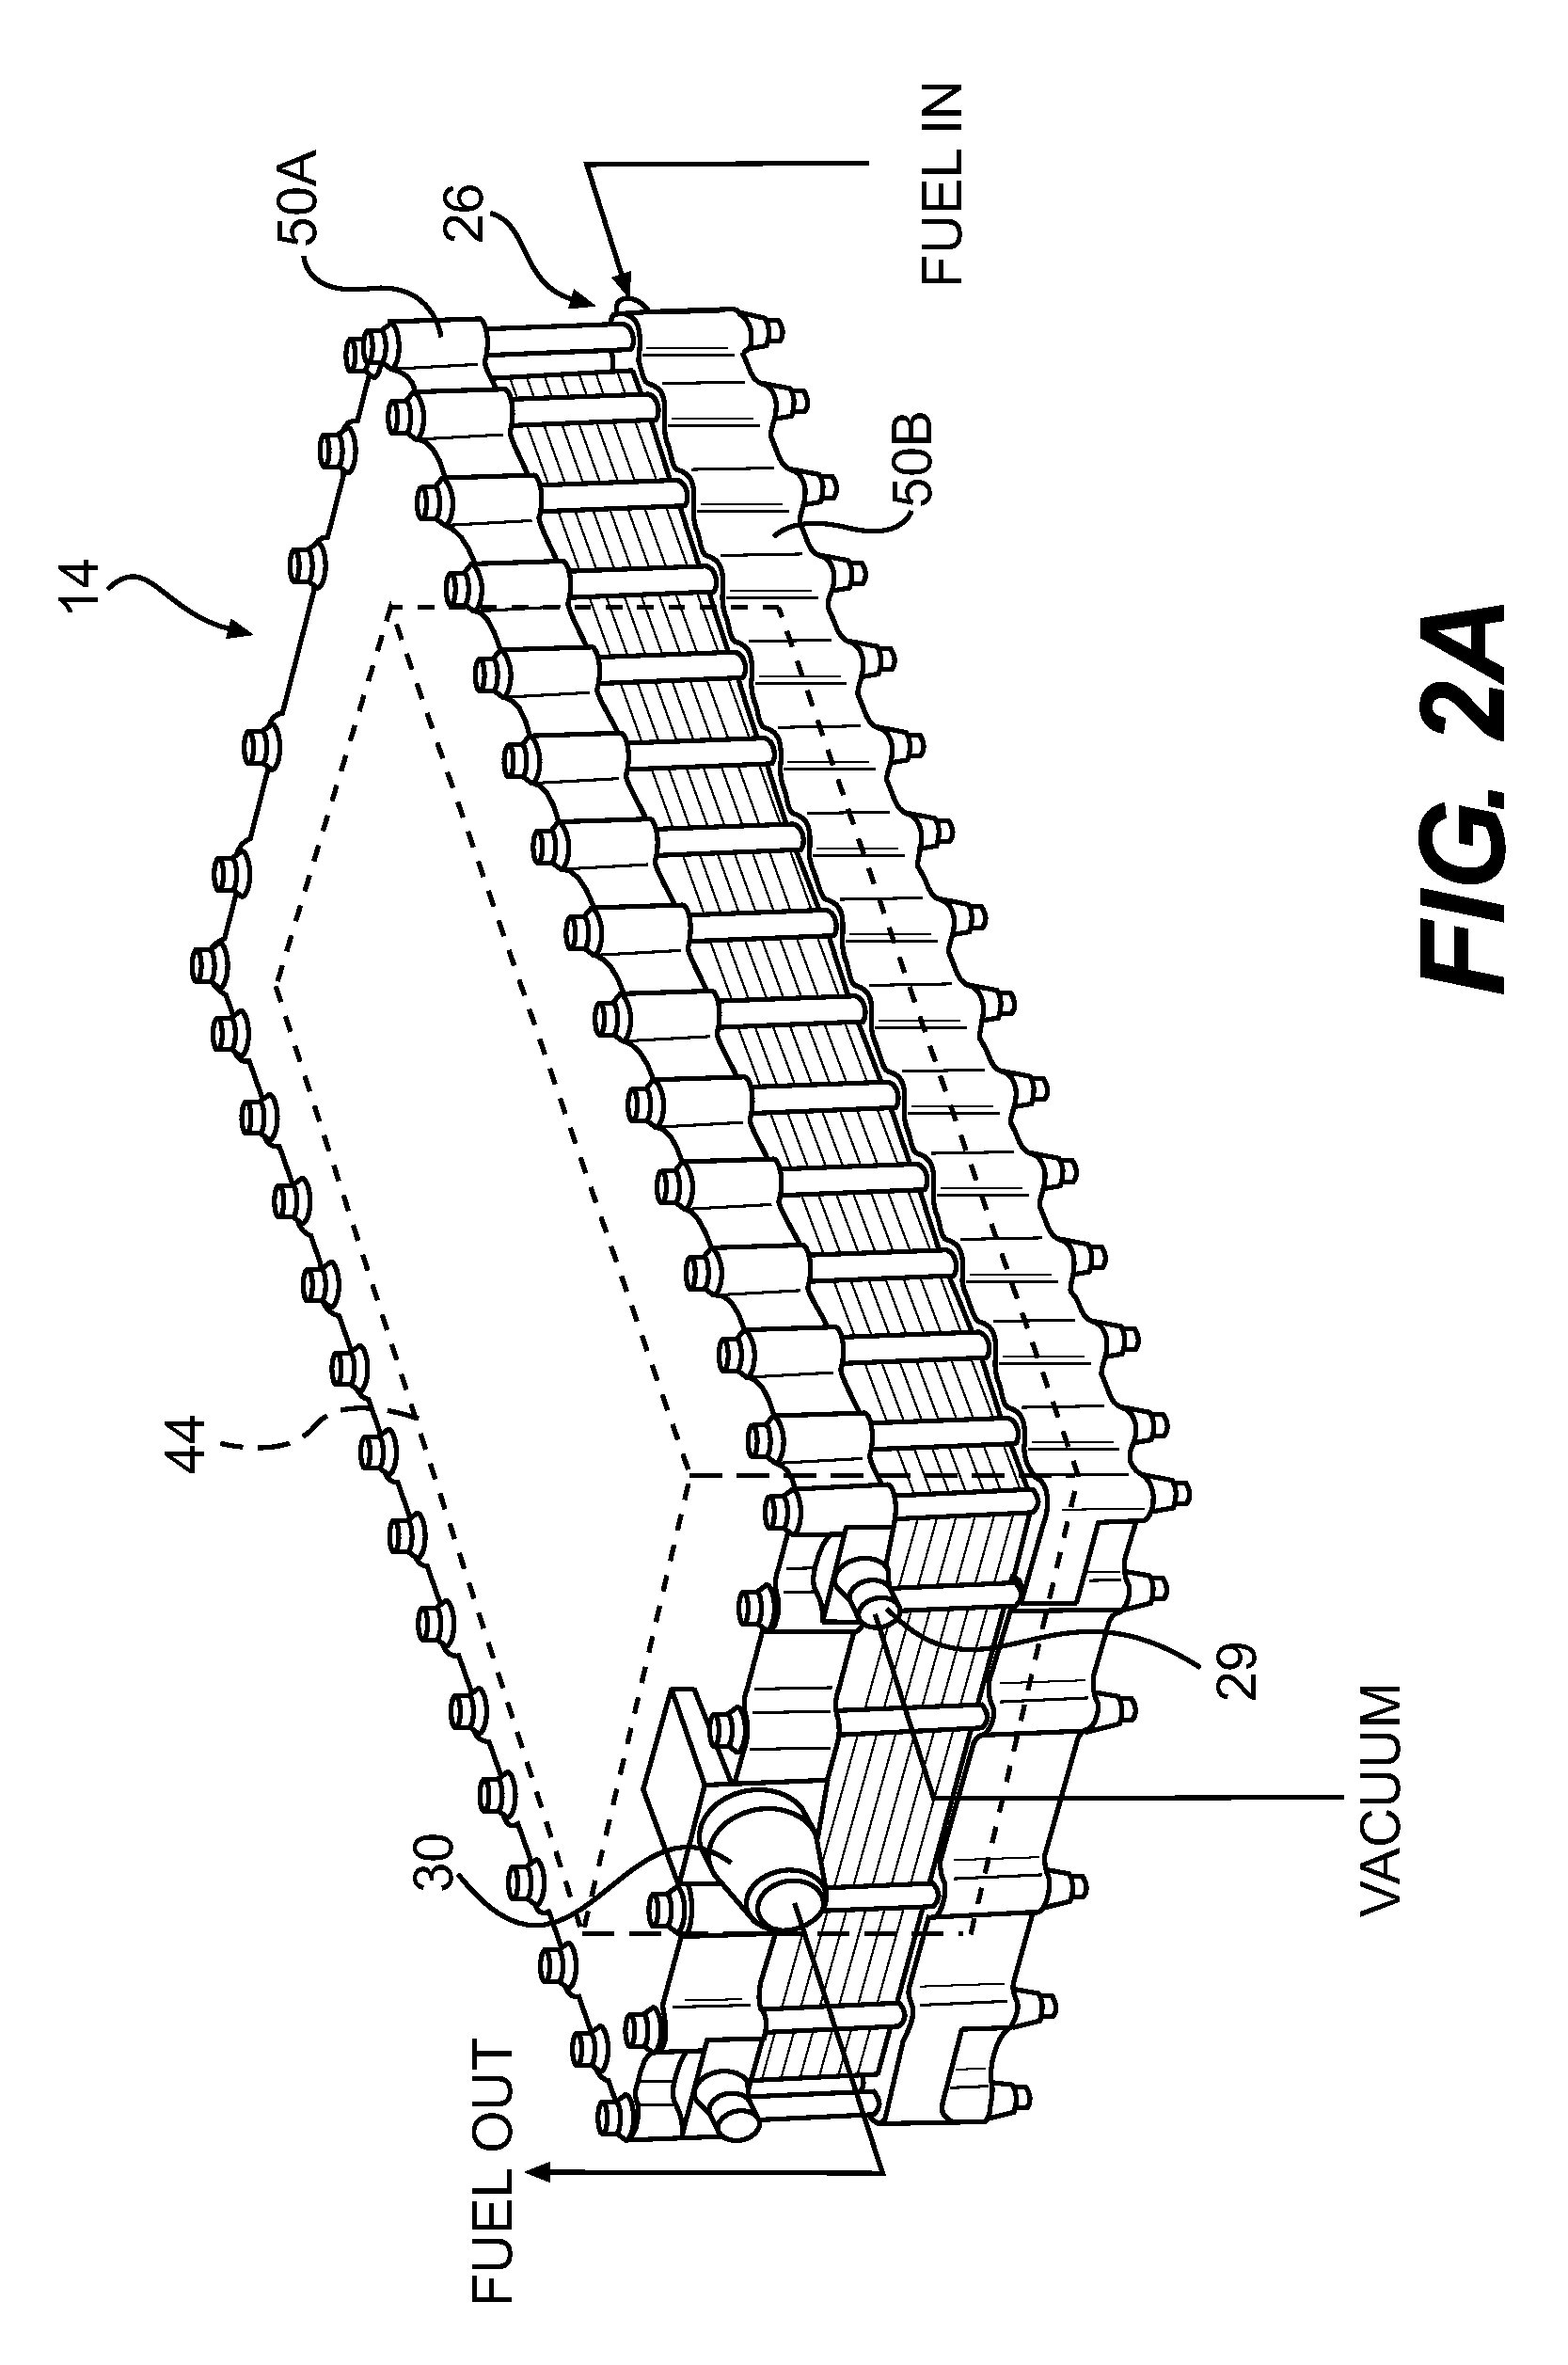 Fuel deoxygenator with porous support plate